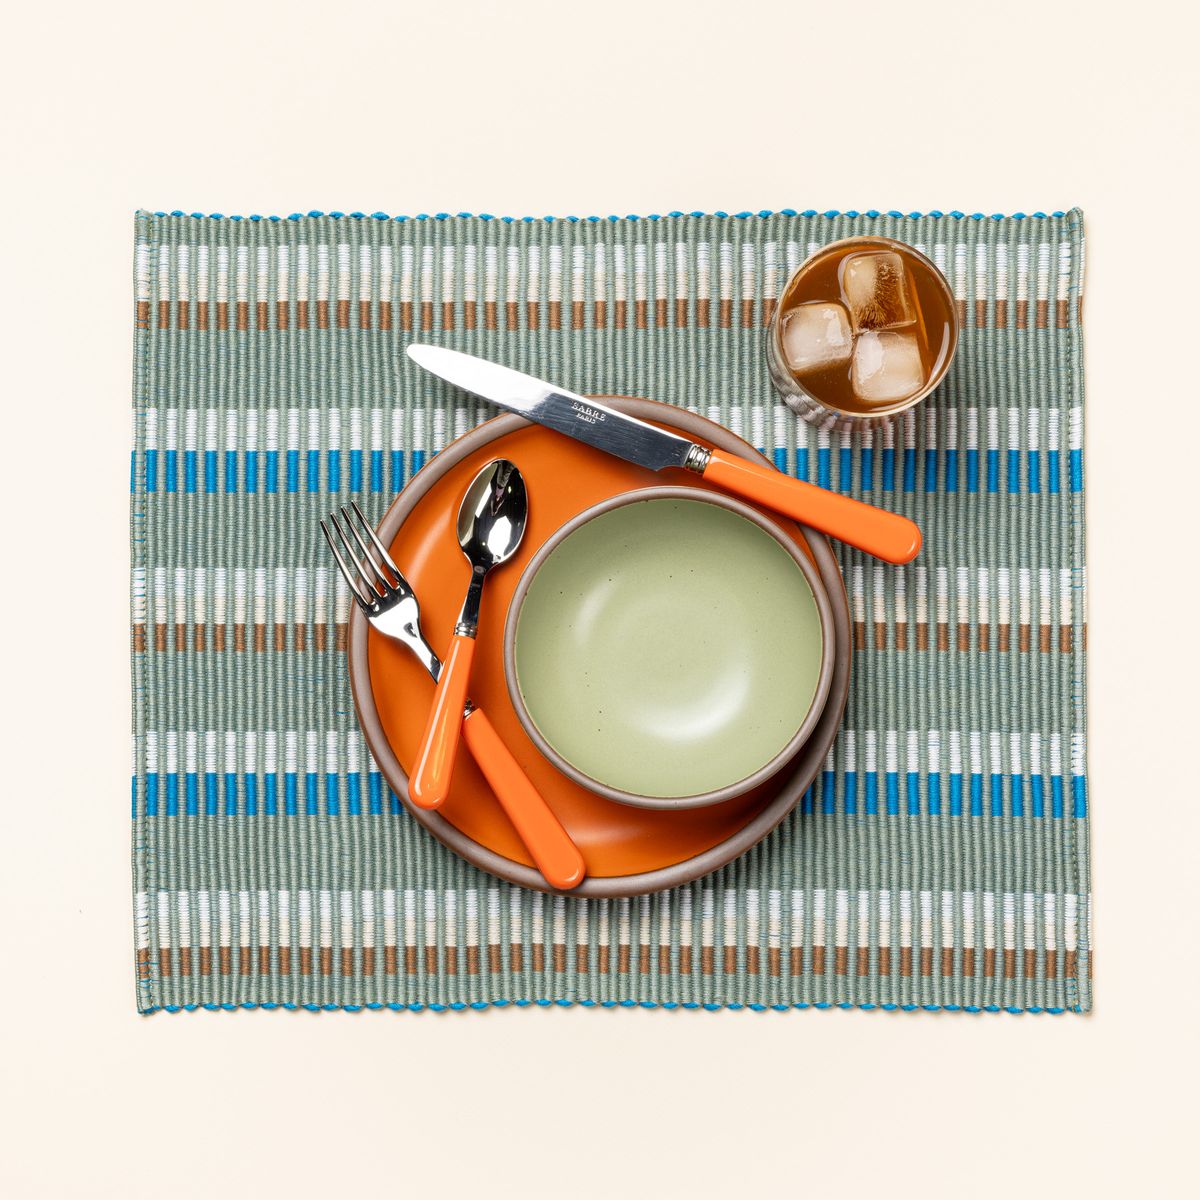 An orange and sage green place setting sits on a rectangle placemat with offset stripe design that is hand woven in sage, blue, and orange colors. Also on the placemat are a cocktail in a clear glass and a bold orange handled fork, spoon, and knife.